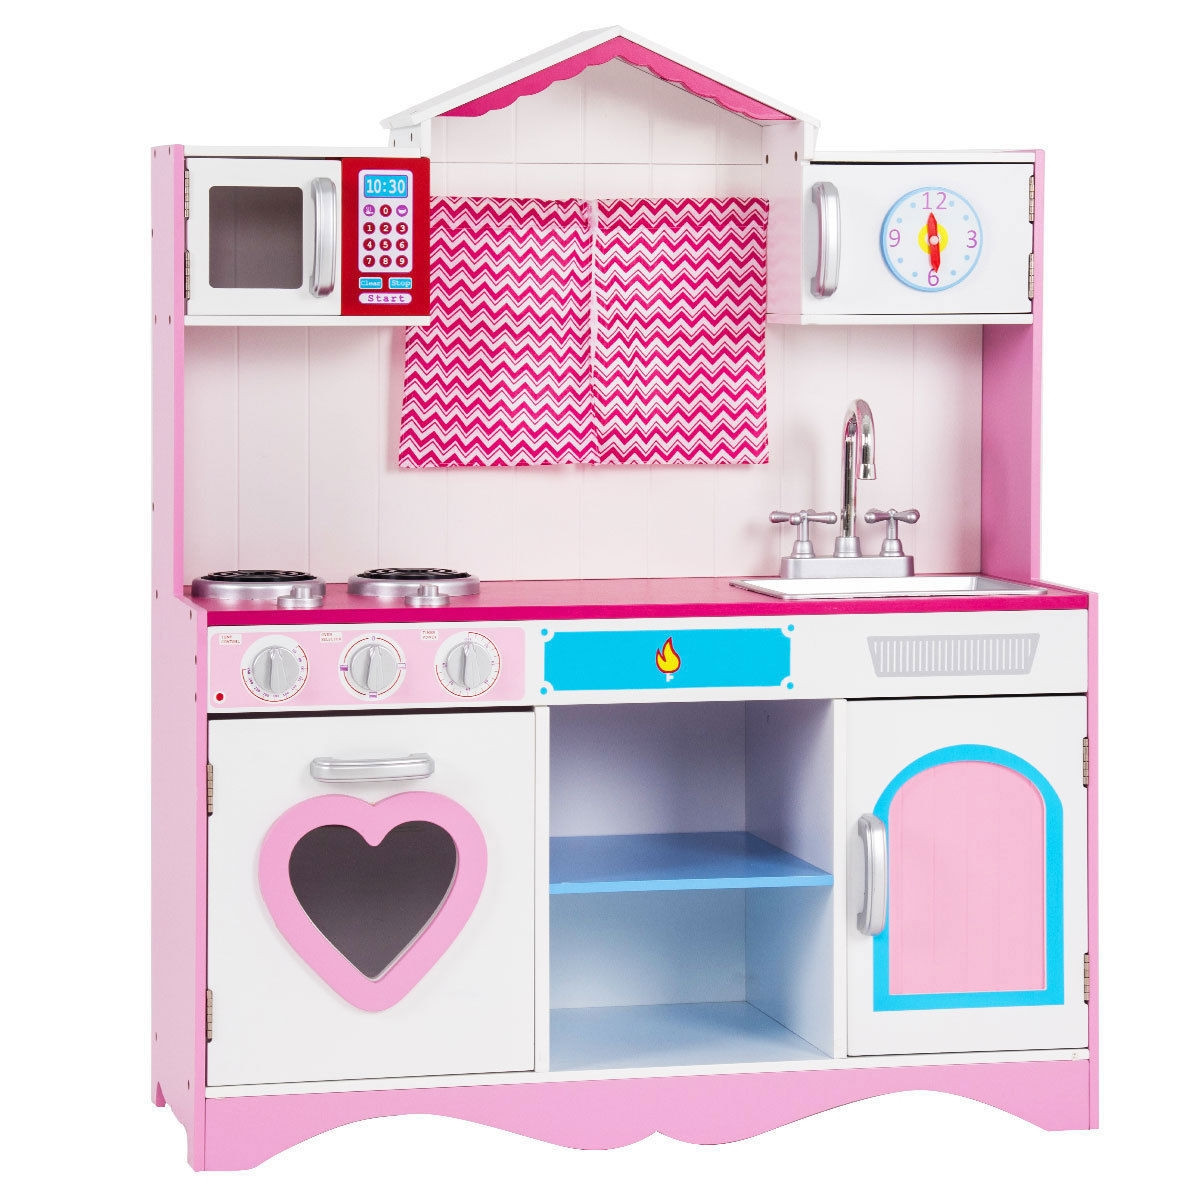 Wood Kitchen Toy Kids Cooking Pretend Play Set Toddler Wooden Playset Pink,Stainless Steel Gas Grills At Lowes